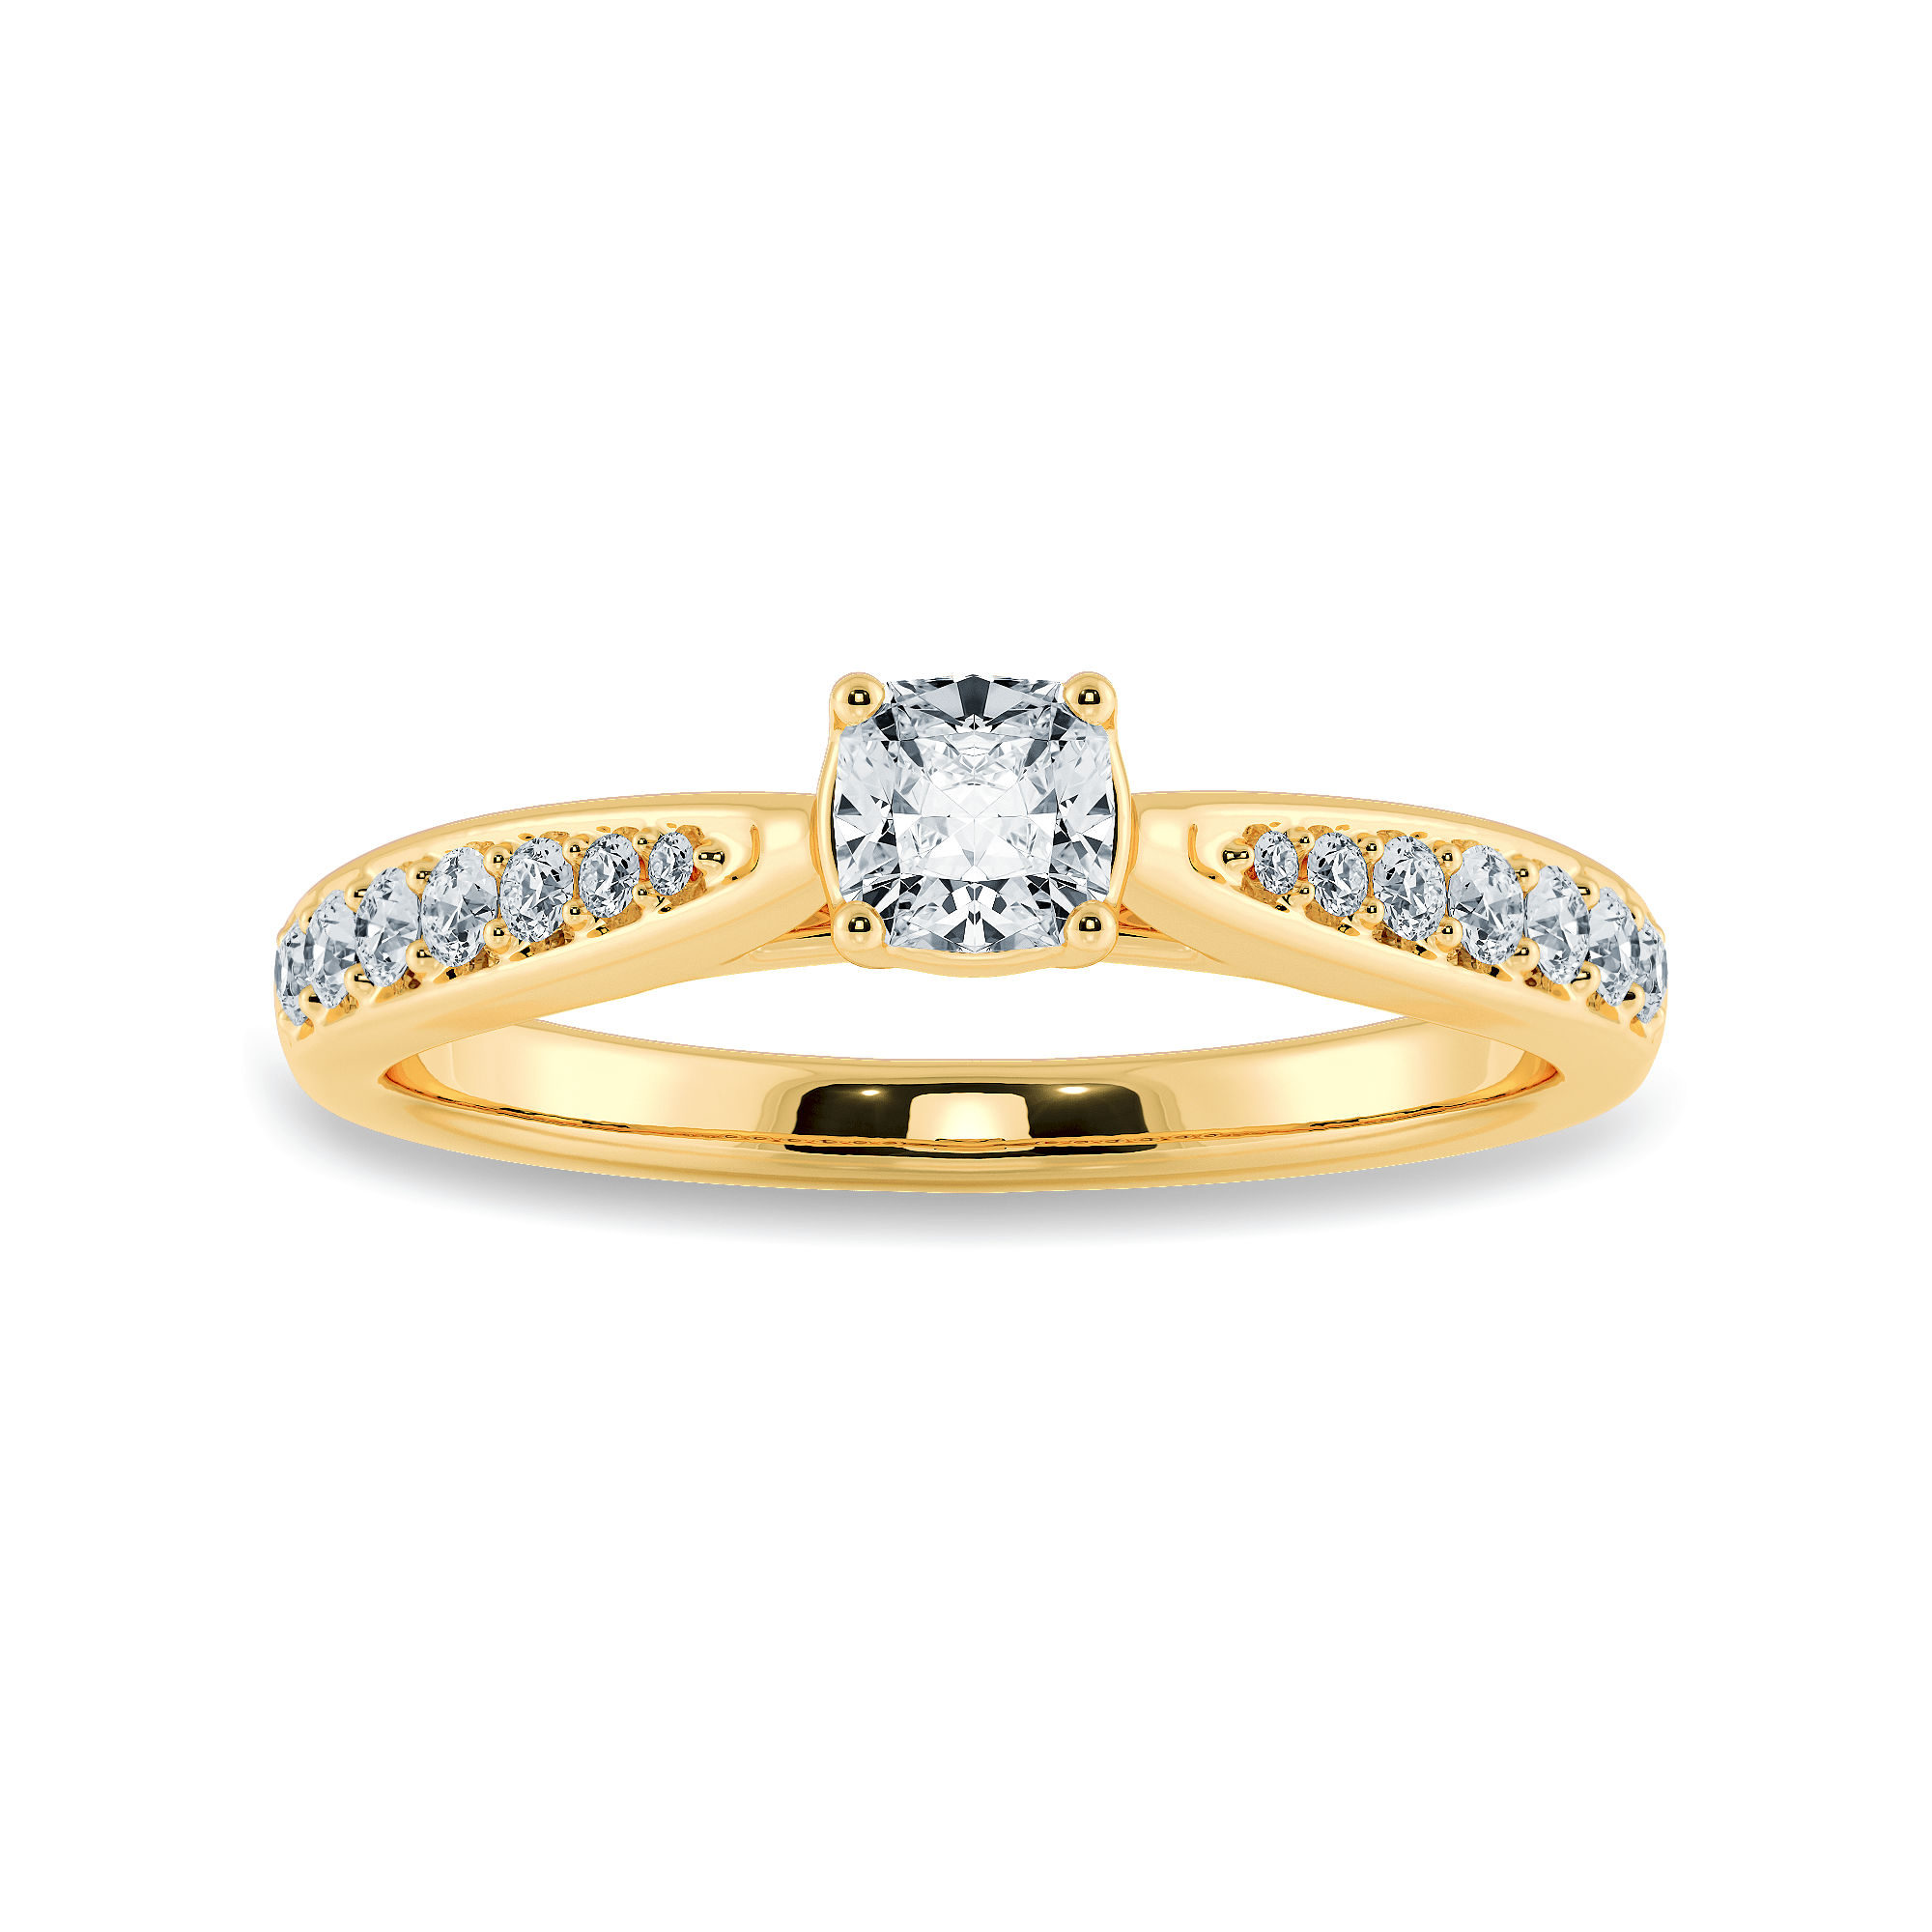 Pear shape engagement ring set with 3.25 ct center 100% natural